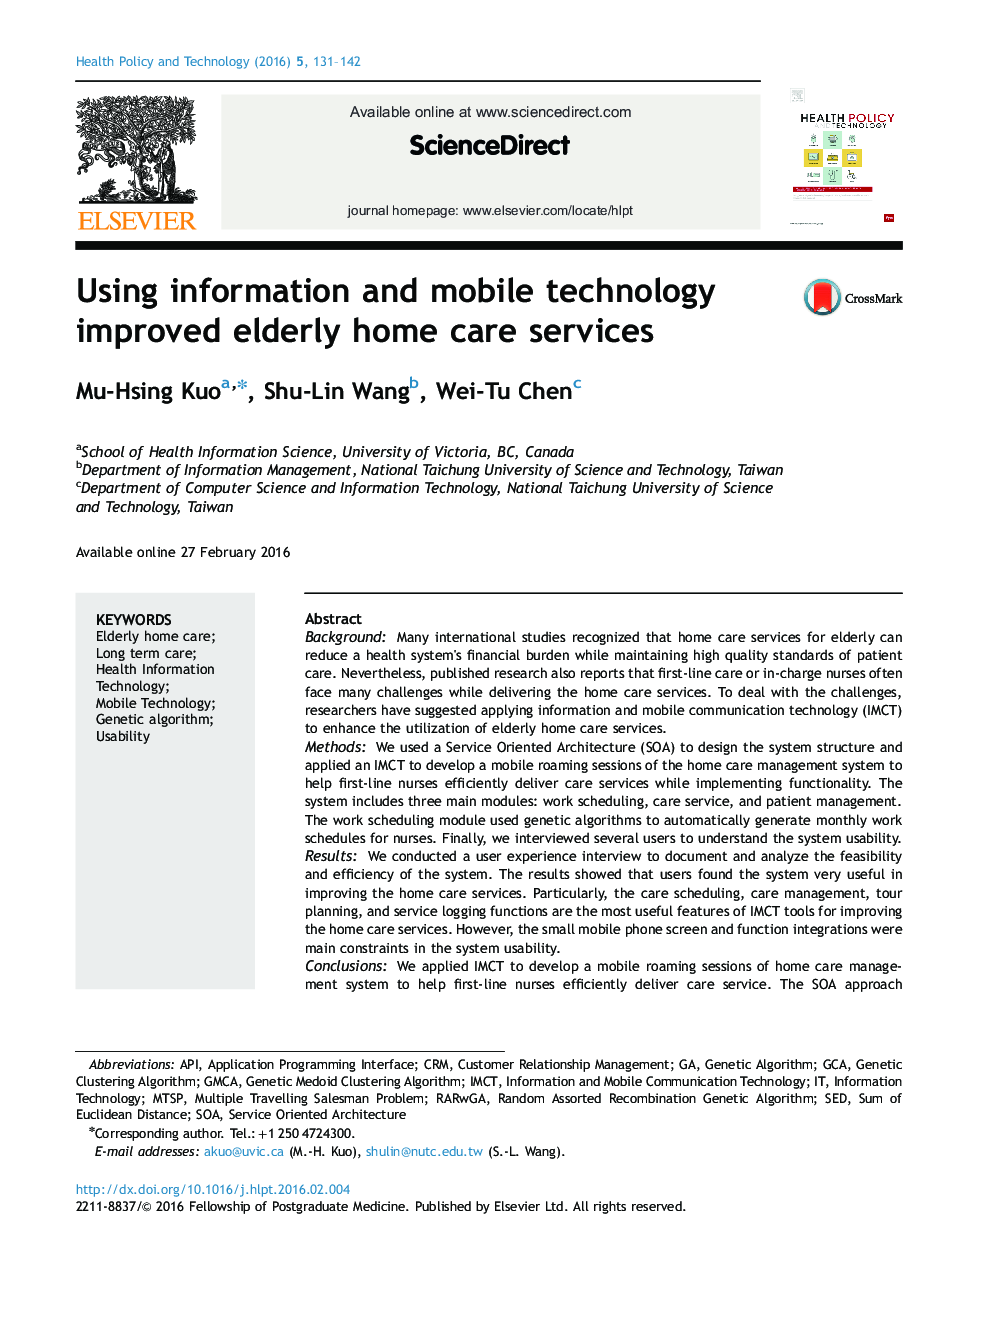 Using information and mobile technology improved elderly home care services